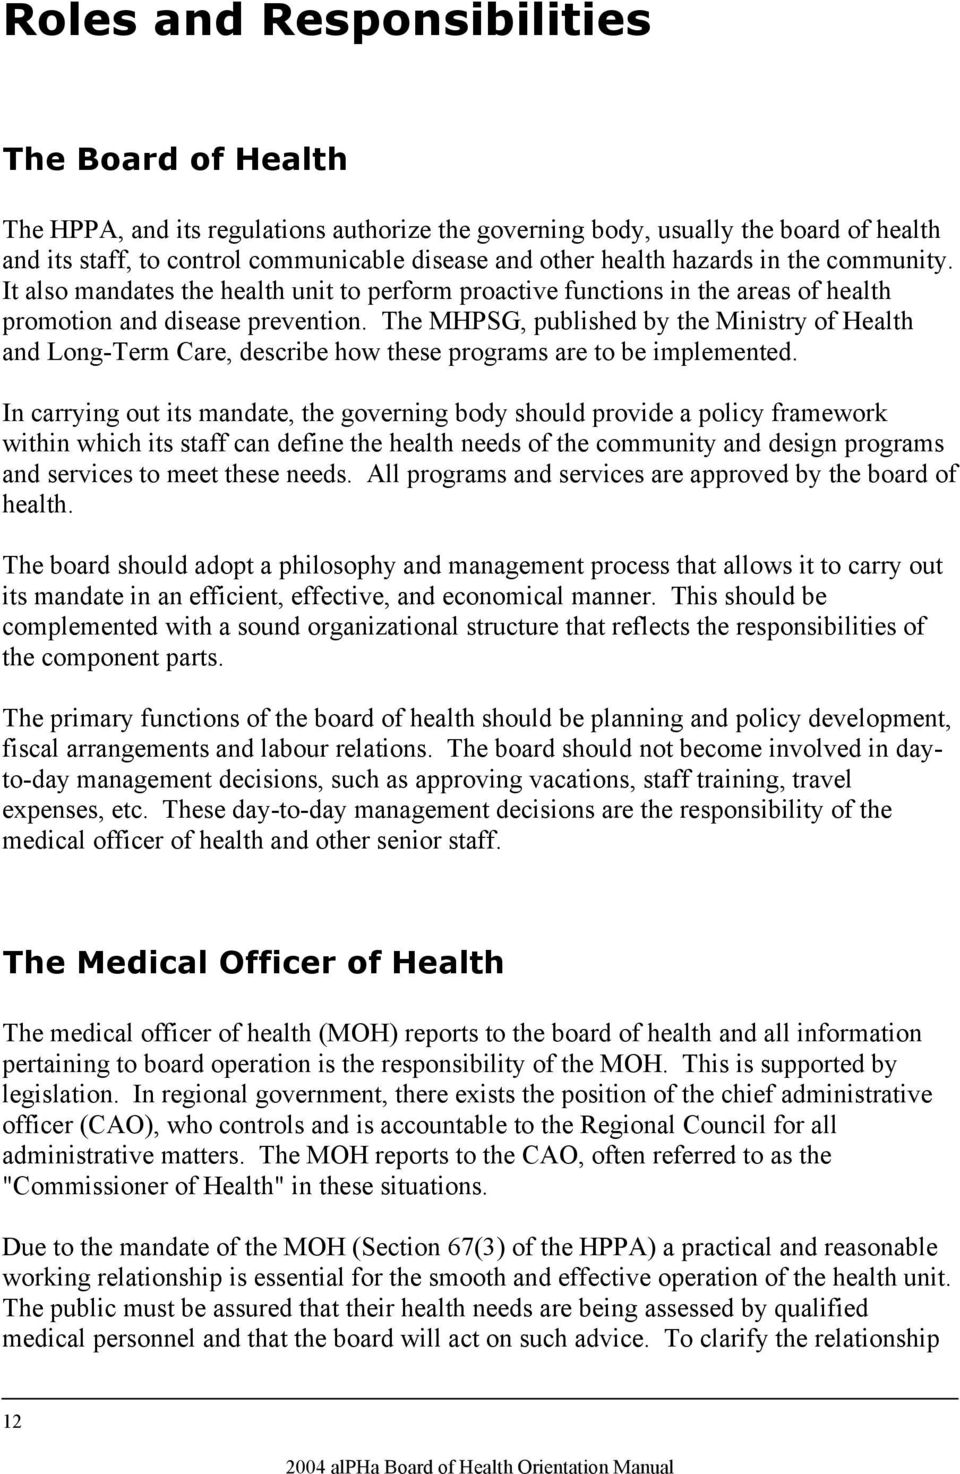 The MHPSG, published by the Ministry of Health and Long-Term Care, describe how these programs are to be implemented.